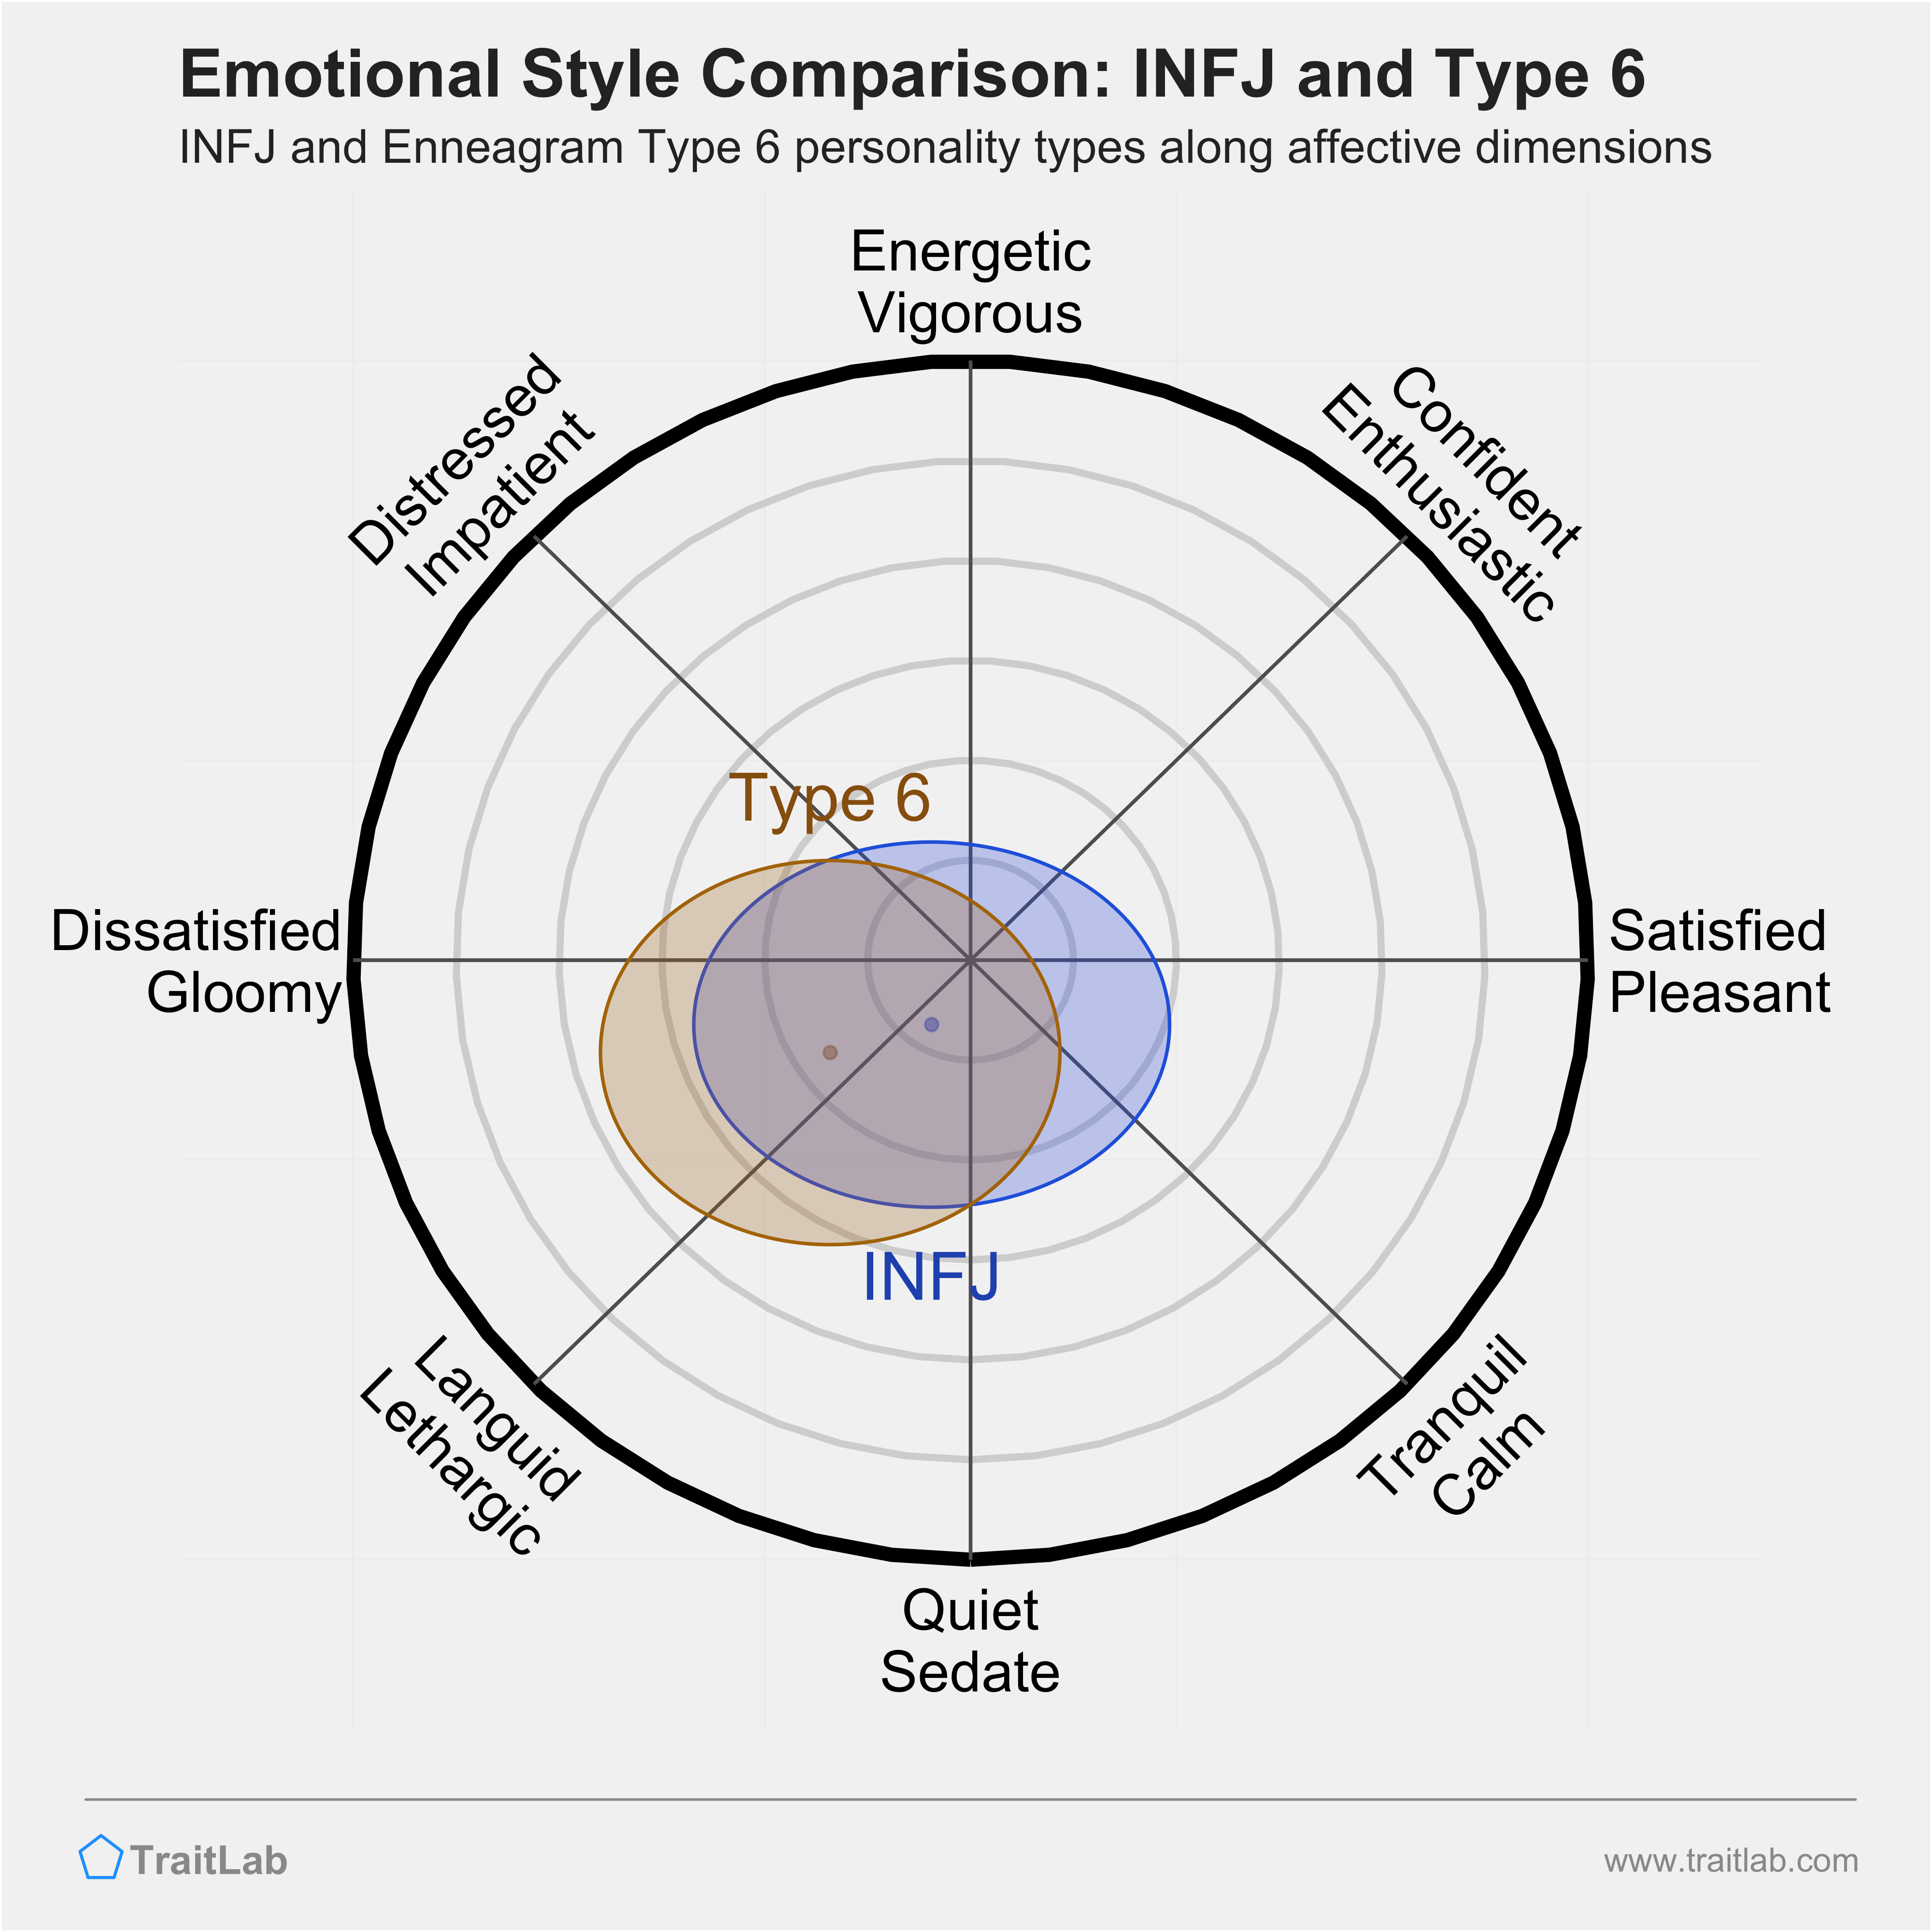 INFJ and Type 6 comparison across emotional (affective) dimensions